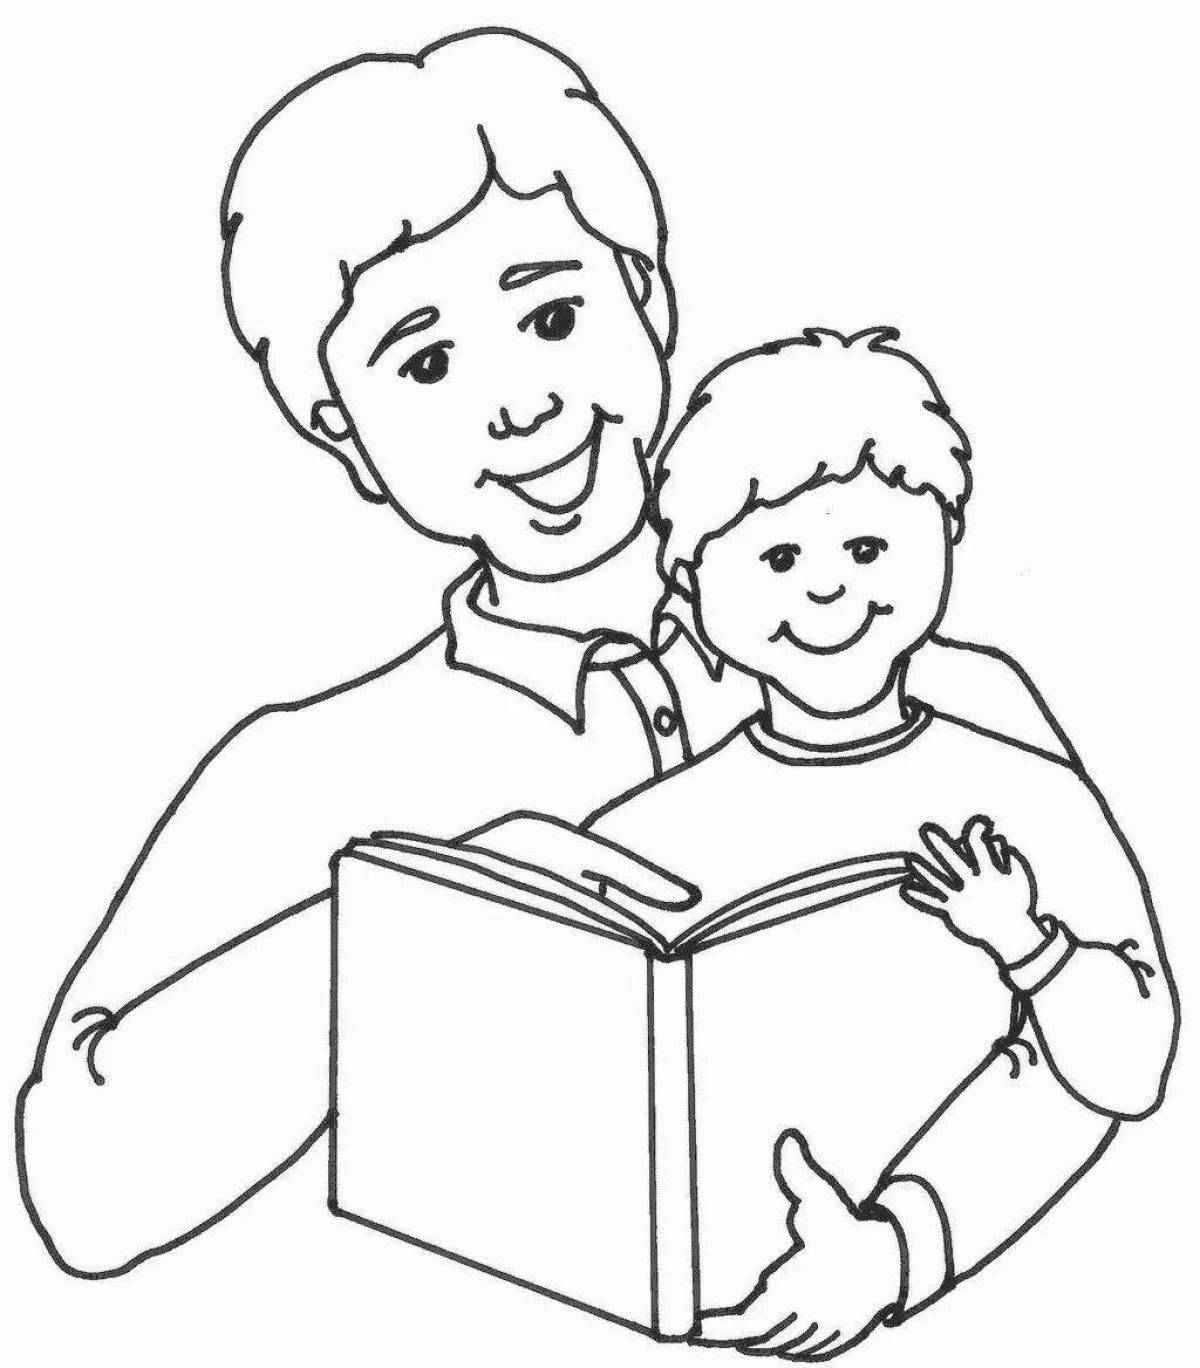 Smiling baby and dad coloring book